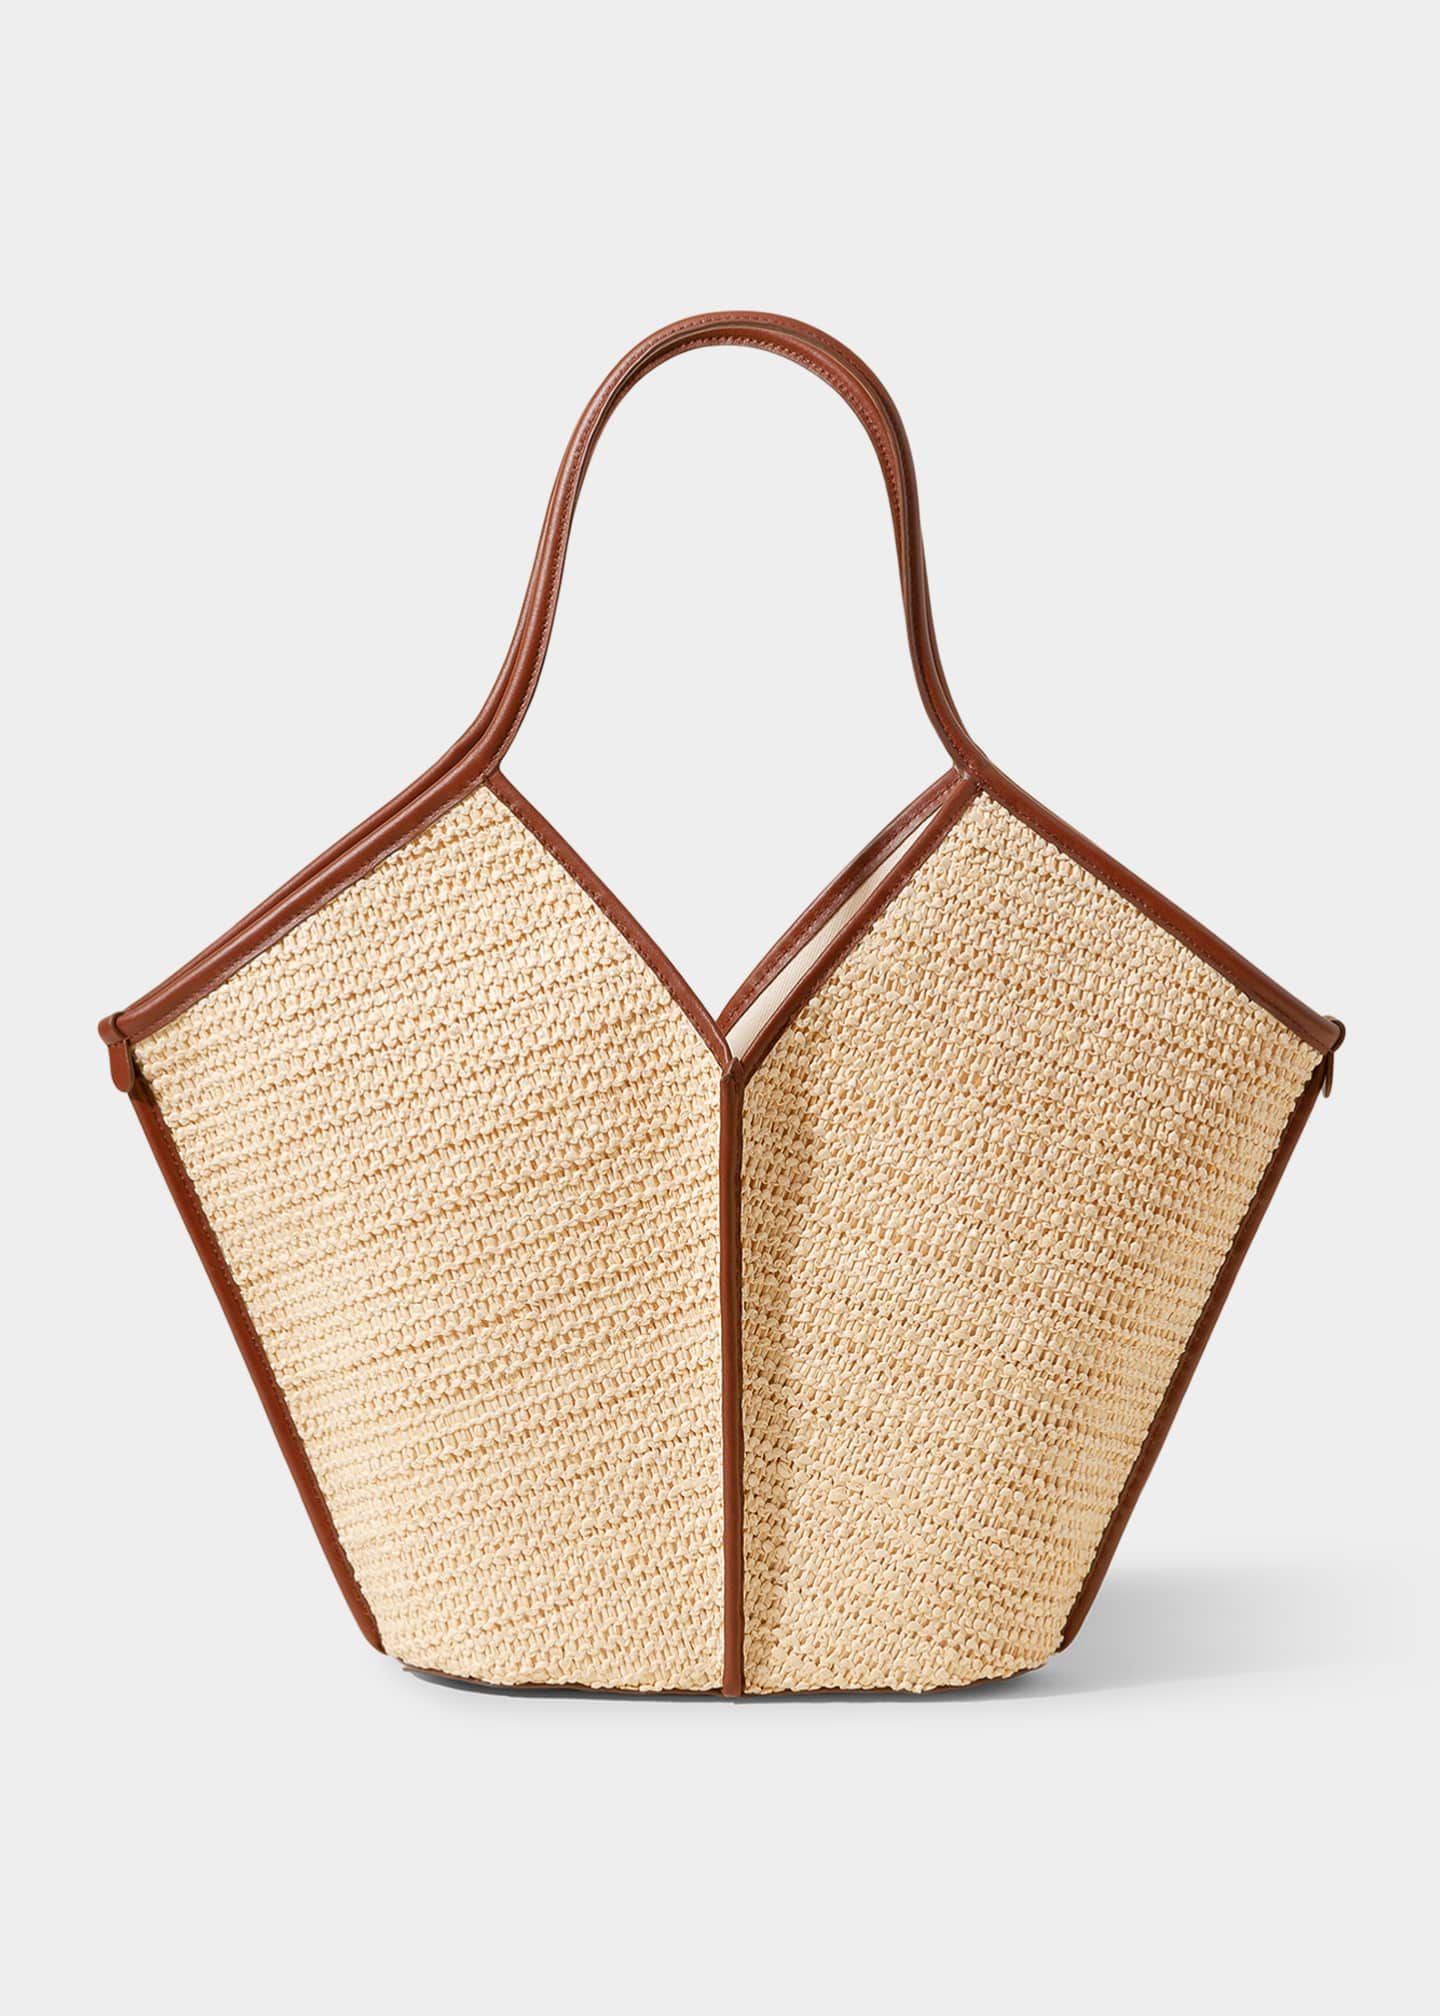 Top Straw Handbags to Keep Your Style Fresh in 2023